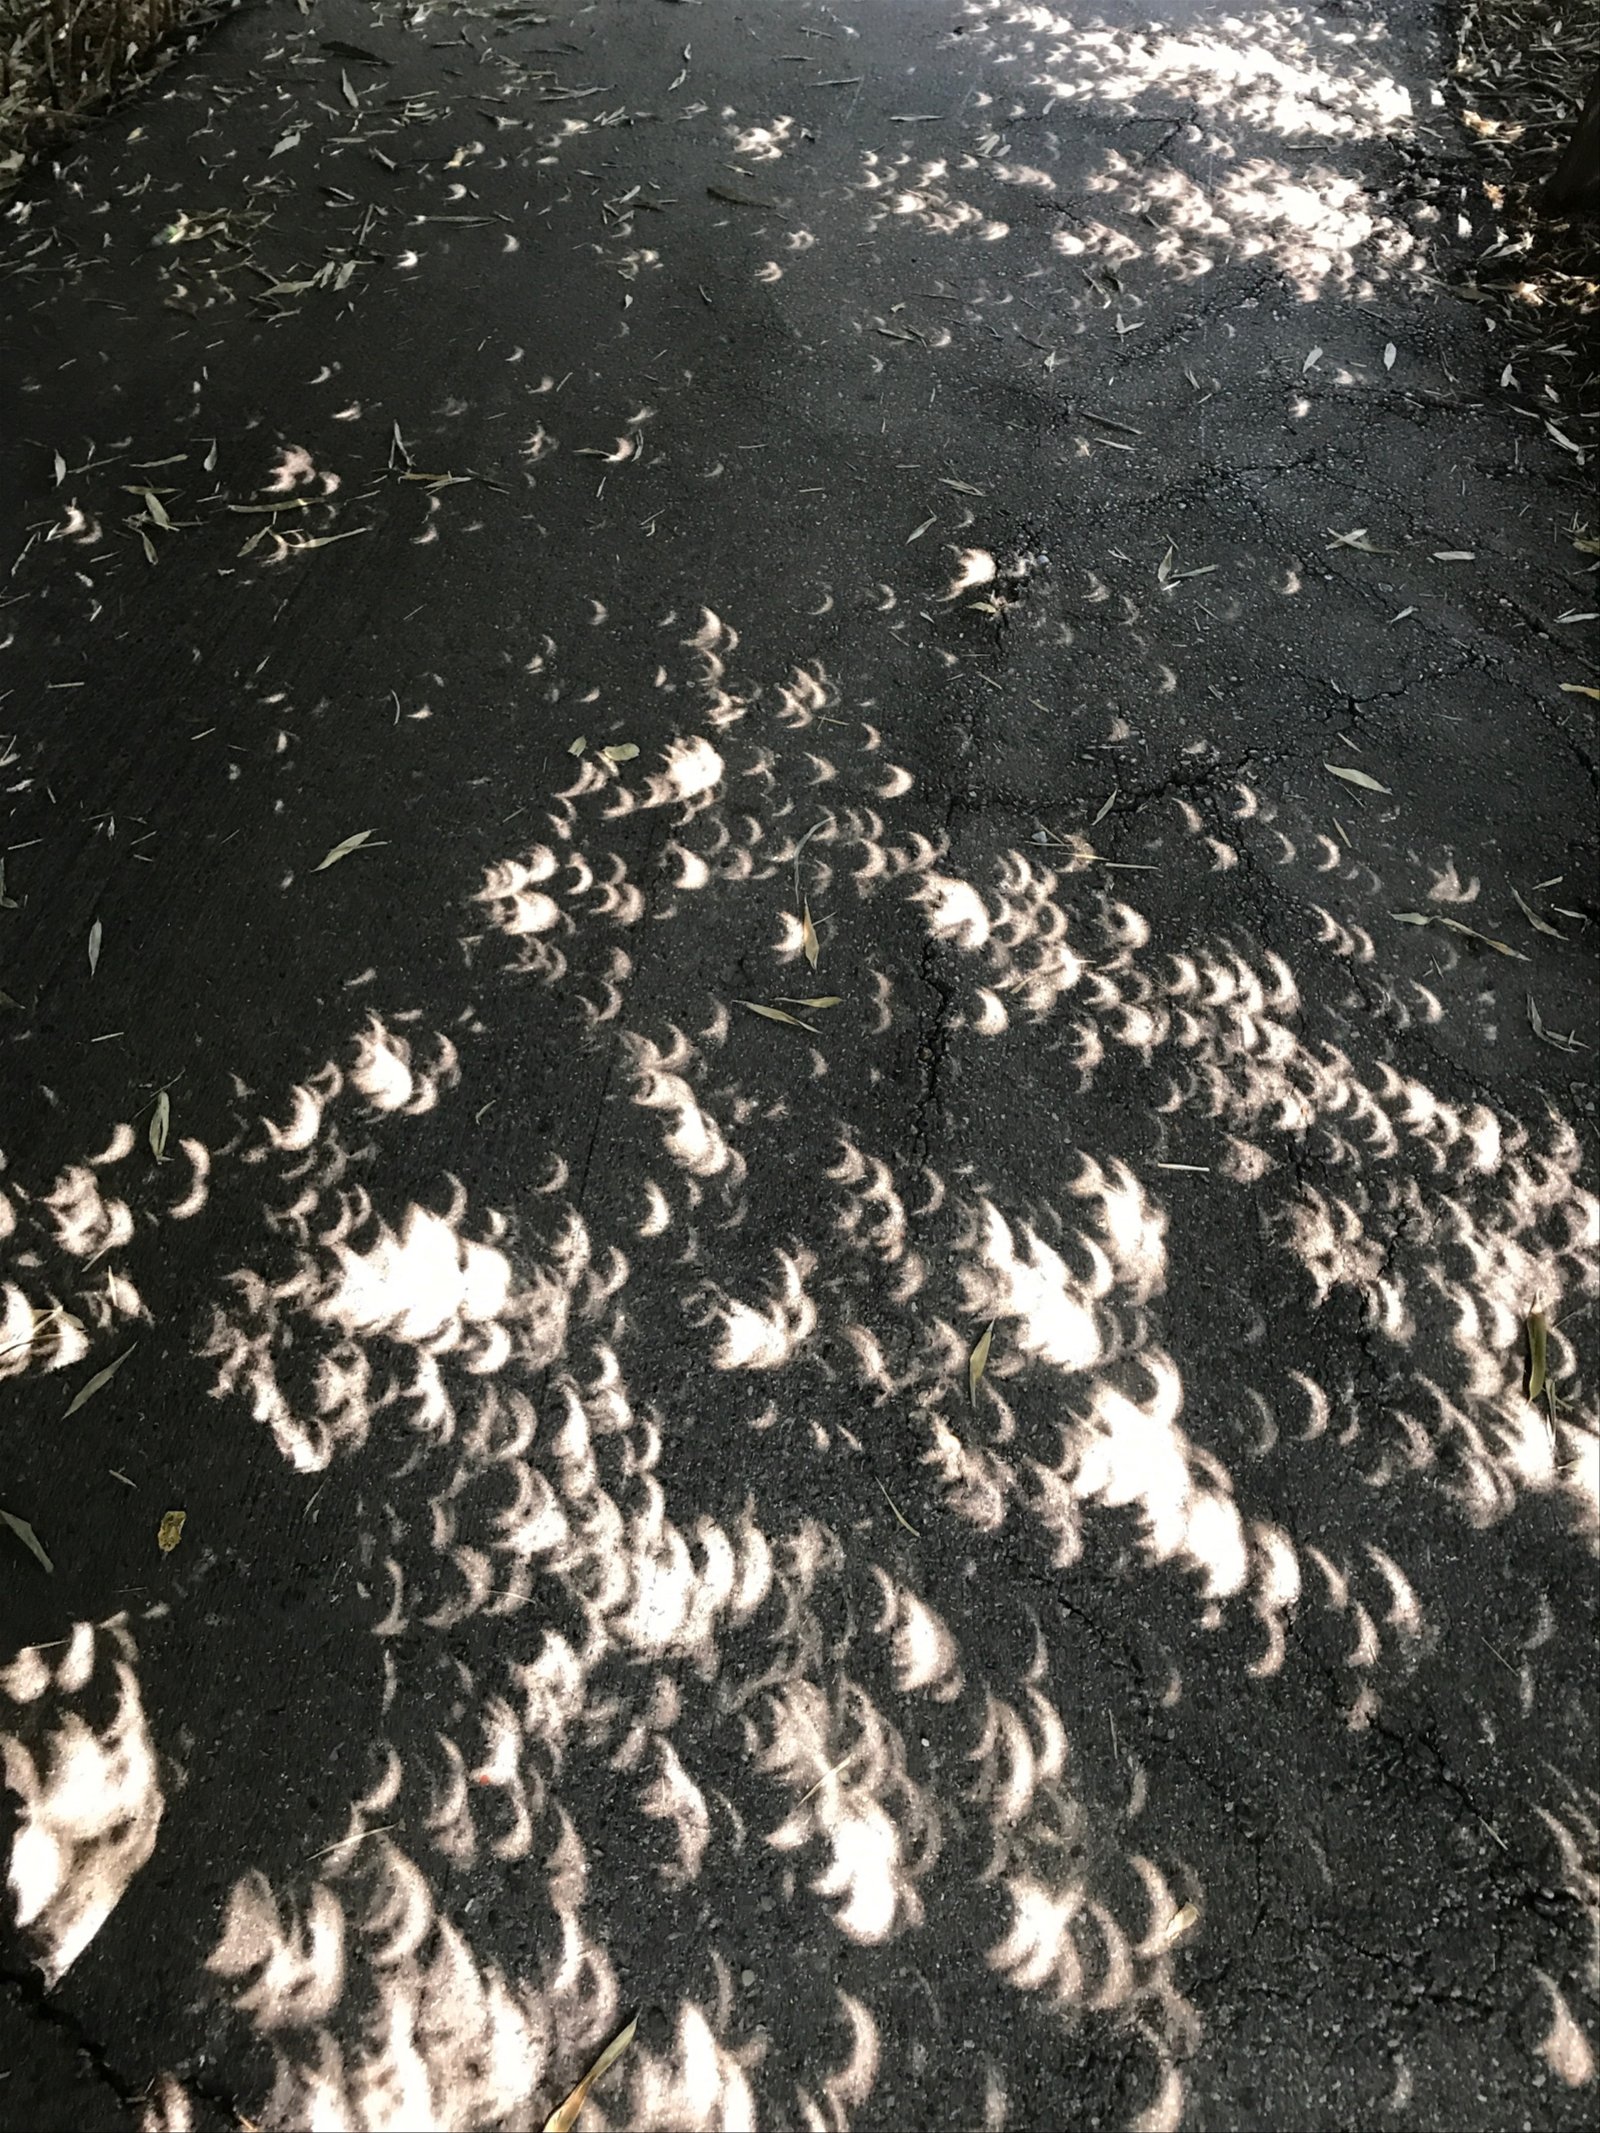 phases of solar eclipse through leaf canopies